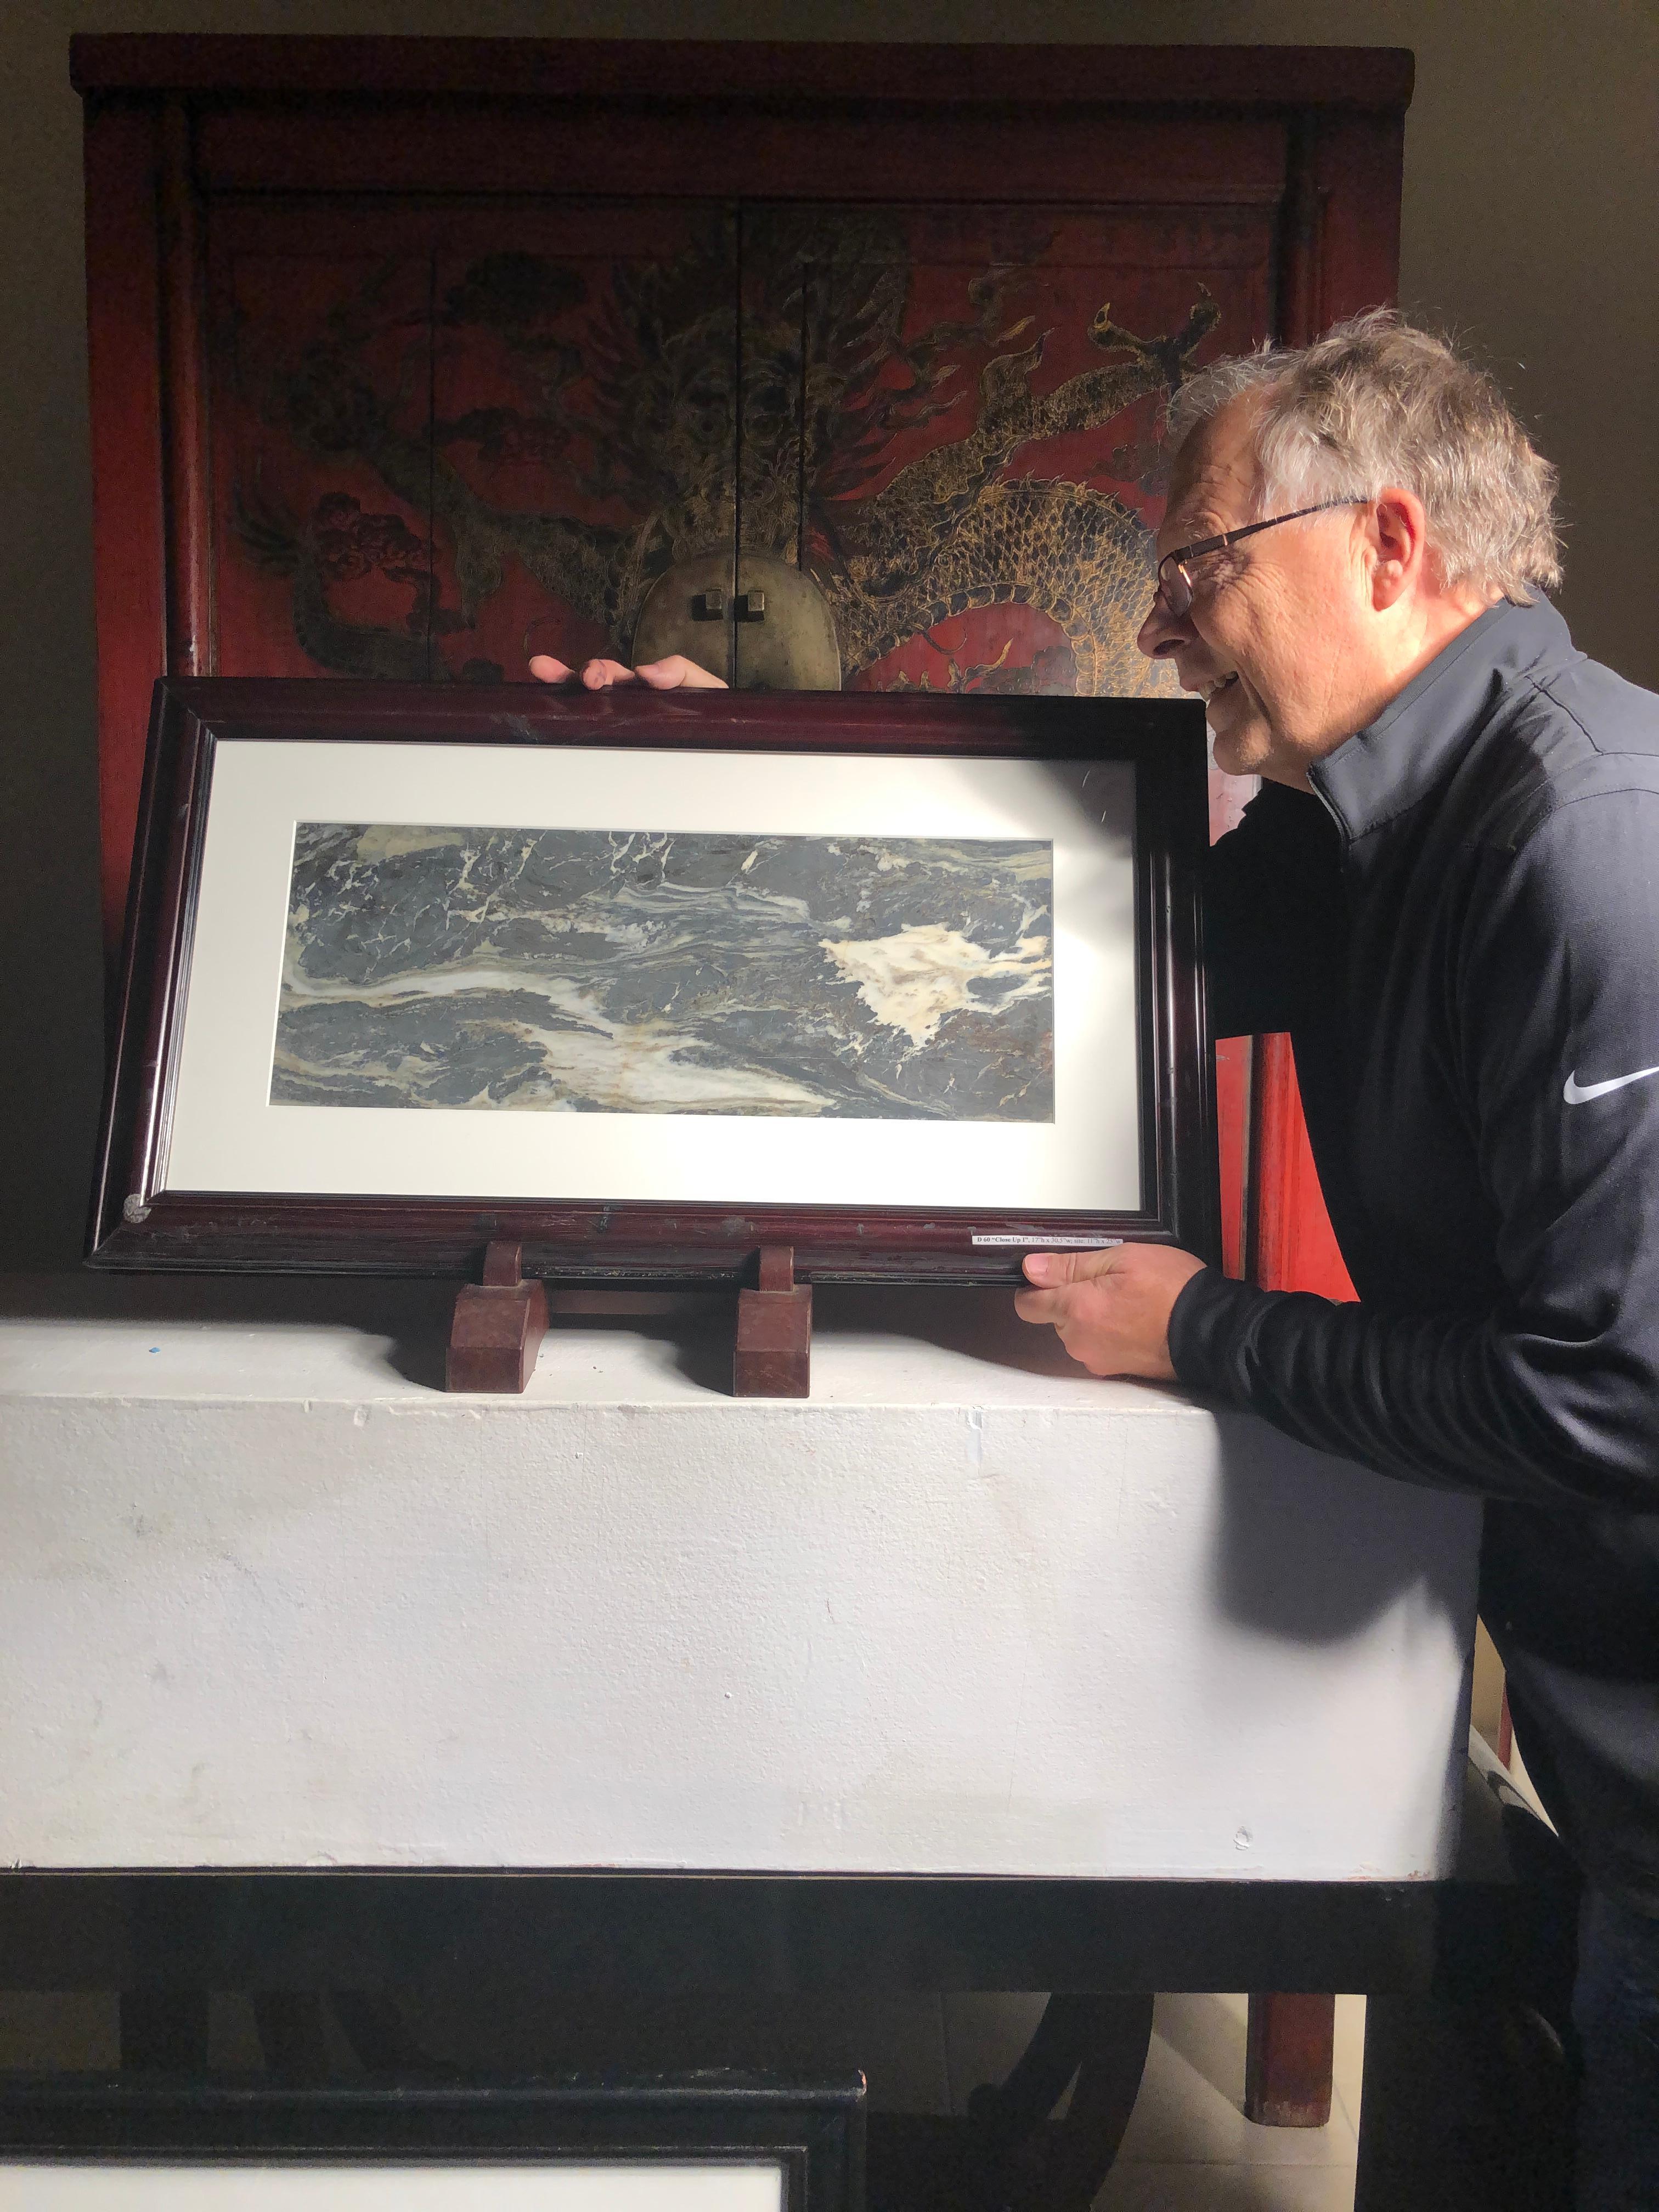 Extraordinary natural work, one of a kind. Custom framed

This Chinese extraordinary natural stone painting of churning sea waves among rocks could remind us of a unique shoreline or boating event in our lives. The powerful and colorful depiction